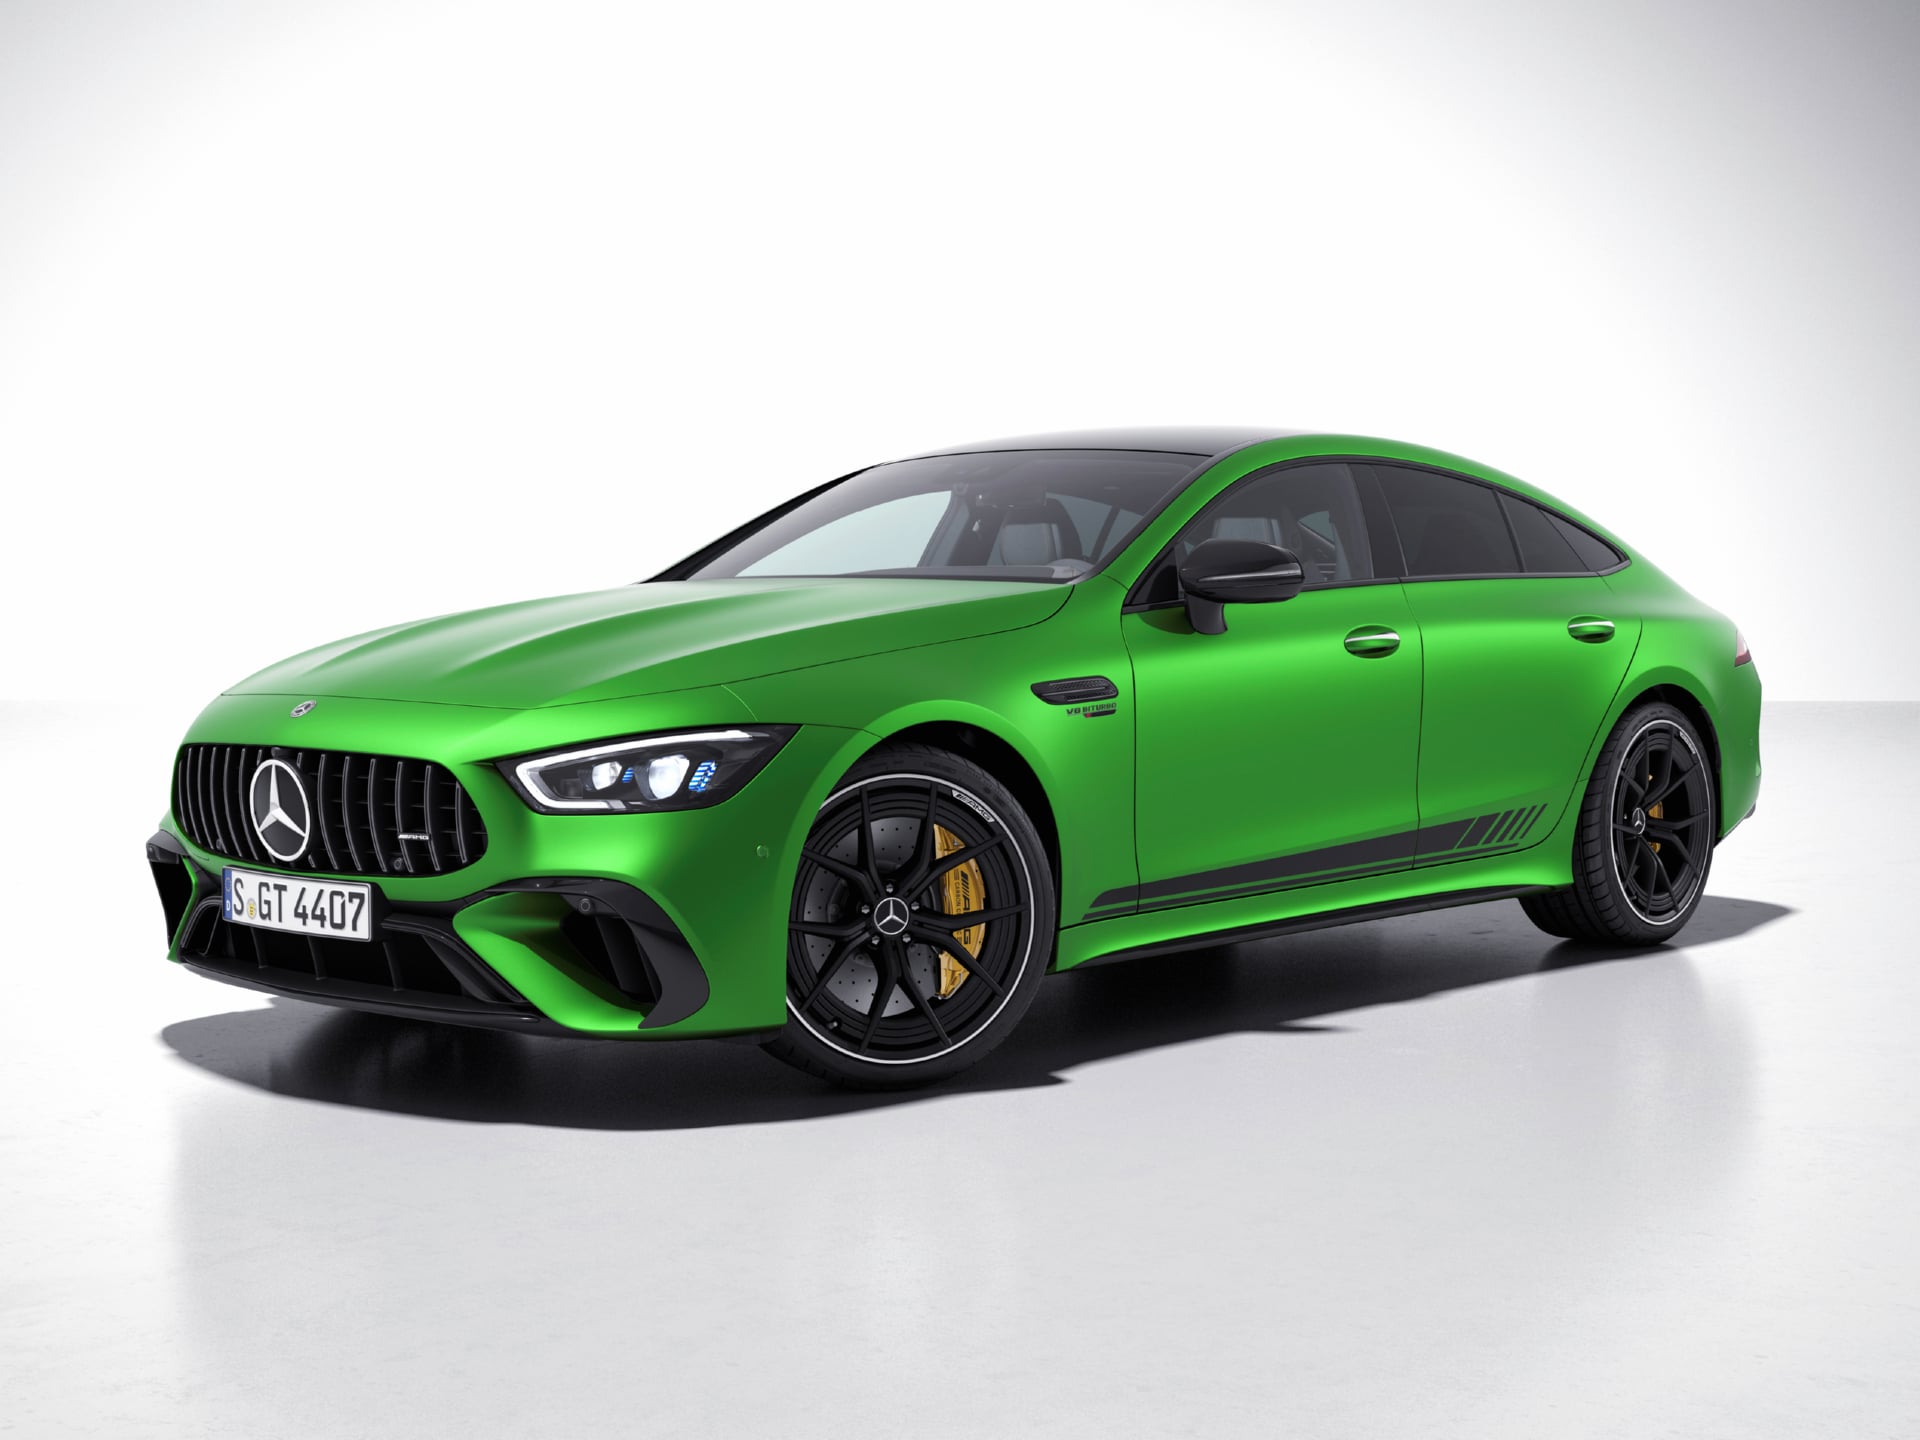 Mercedes-AMG GT 63 S E Performance wallpapers HD quality